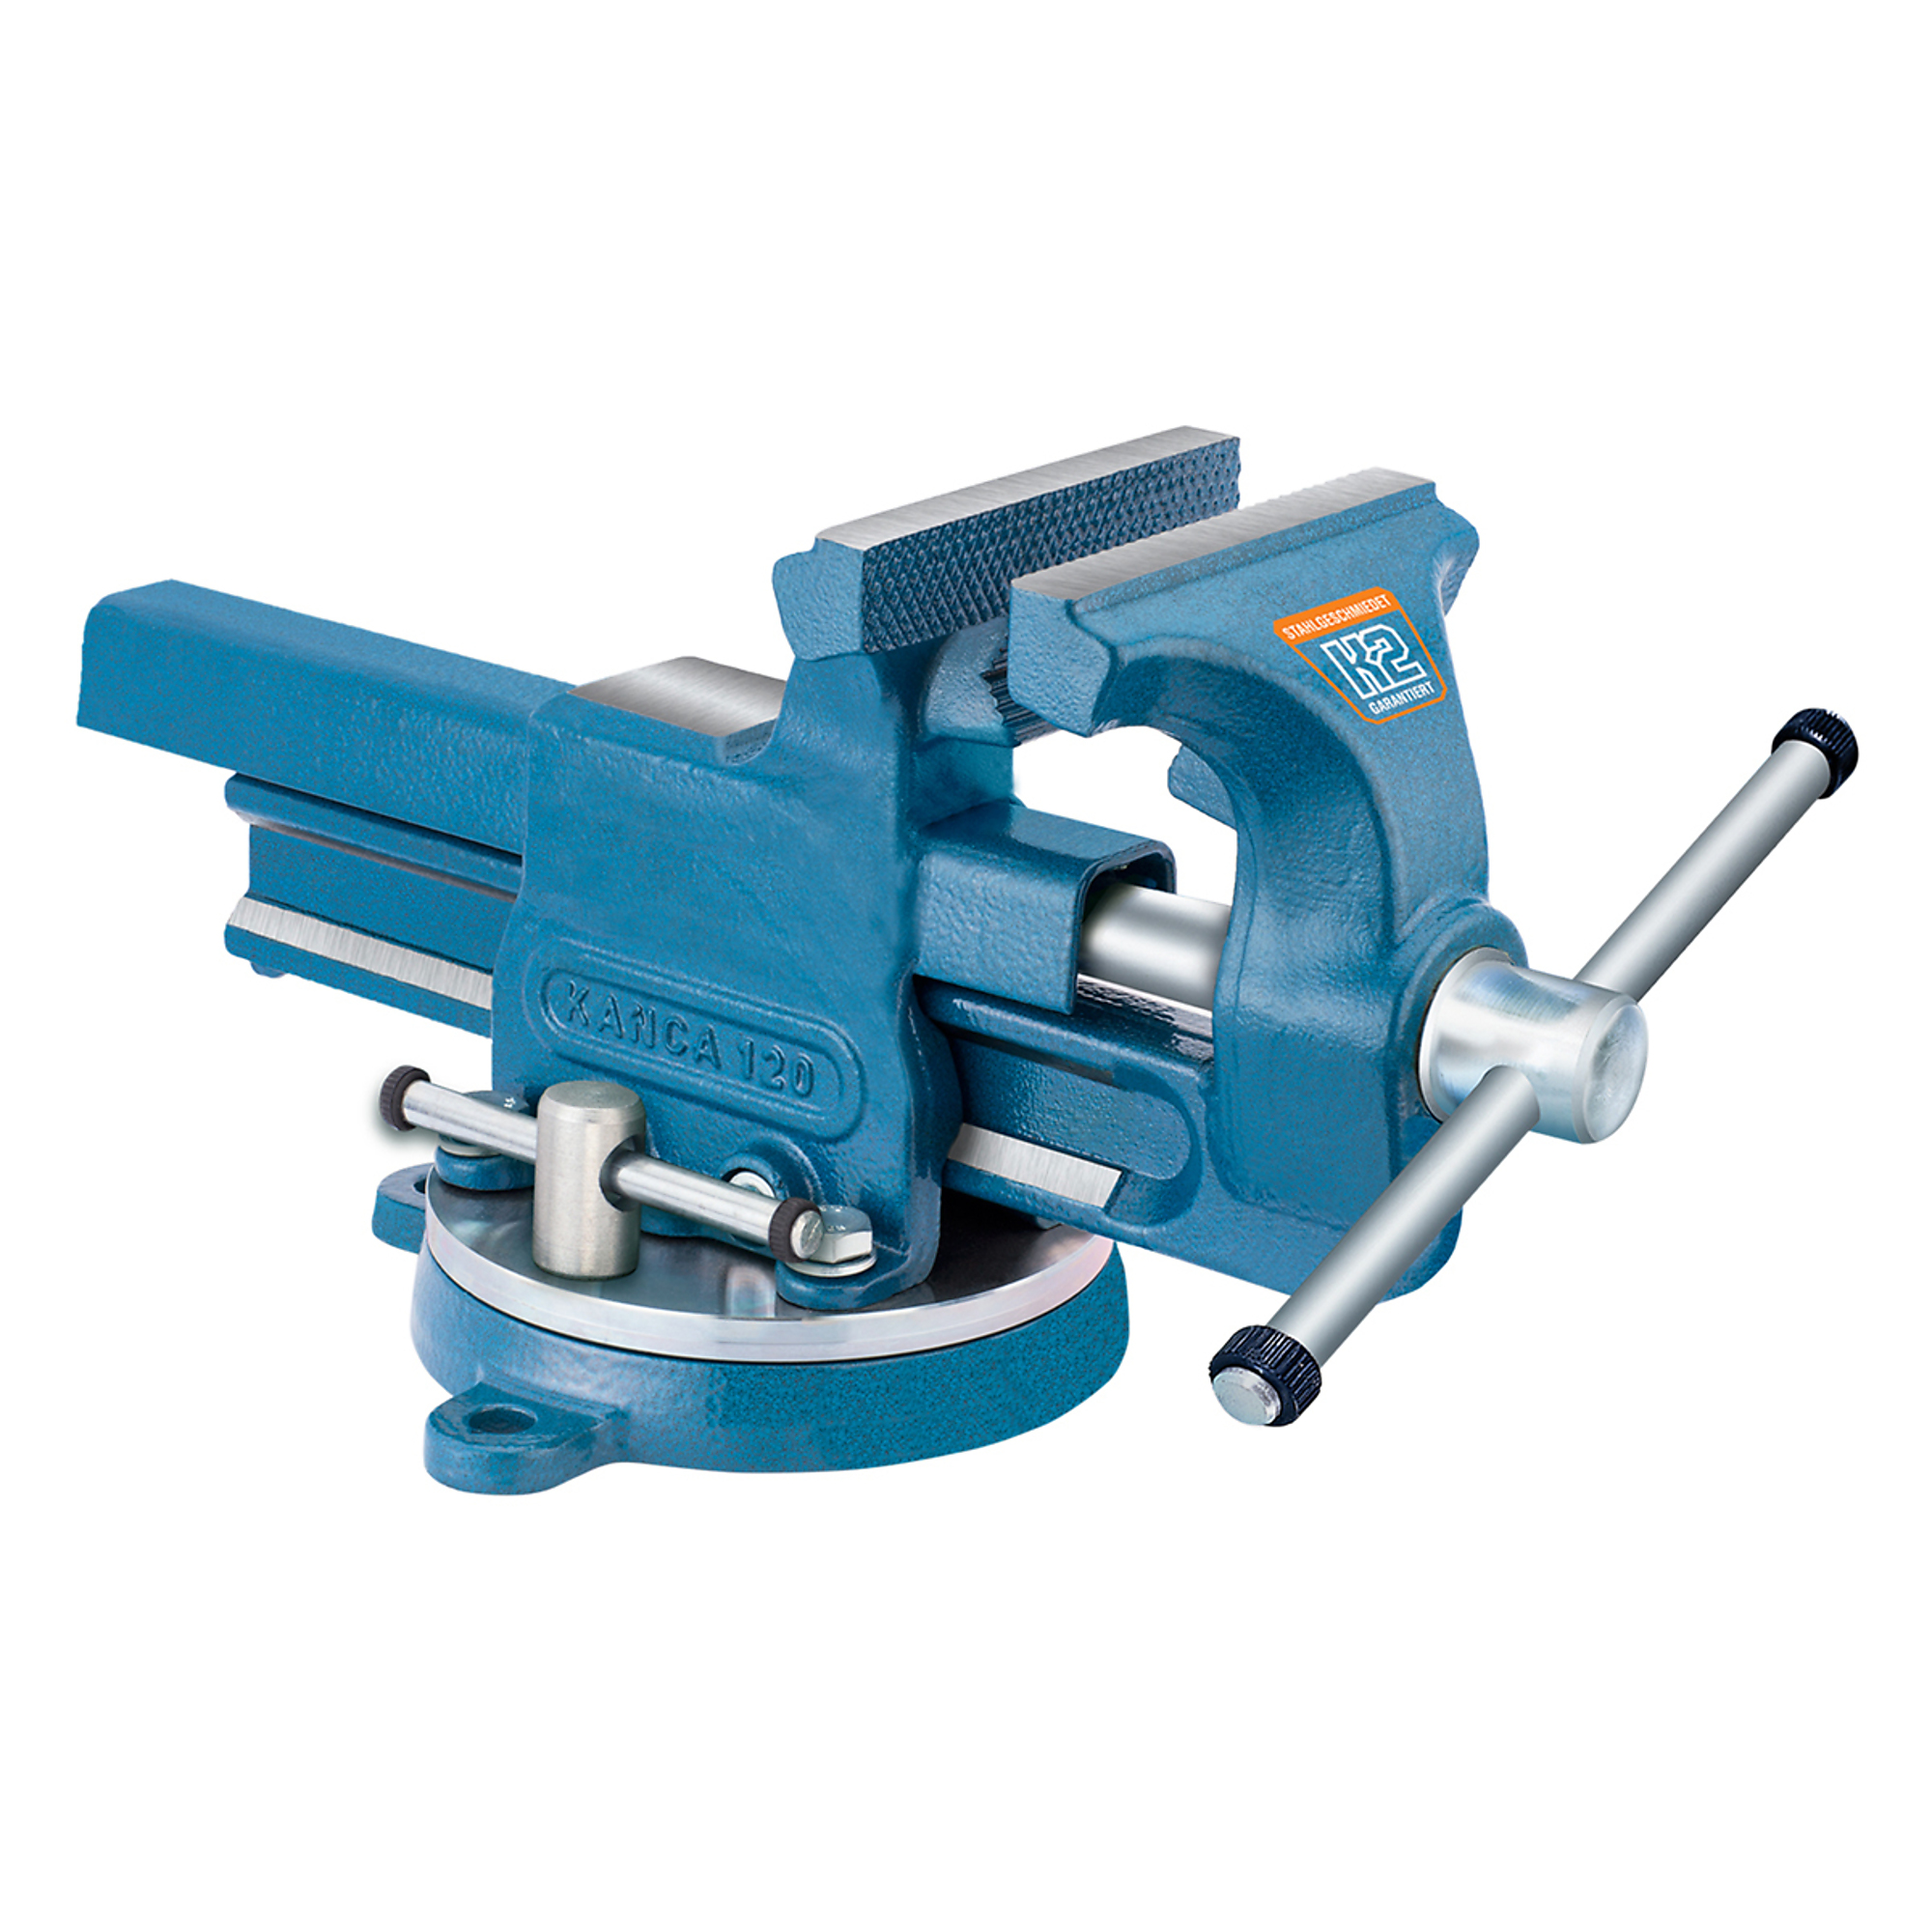 KANCA, K2 PLUMBERS VISE w. SWIVEL BASE 160 MM - 6.4Inch, Jaw Width 6.4 in, Jaw Capacity 8.5 in, Model K2 Pipe and Bench Vise